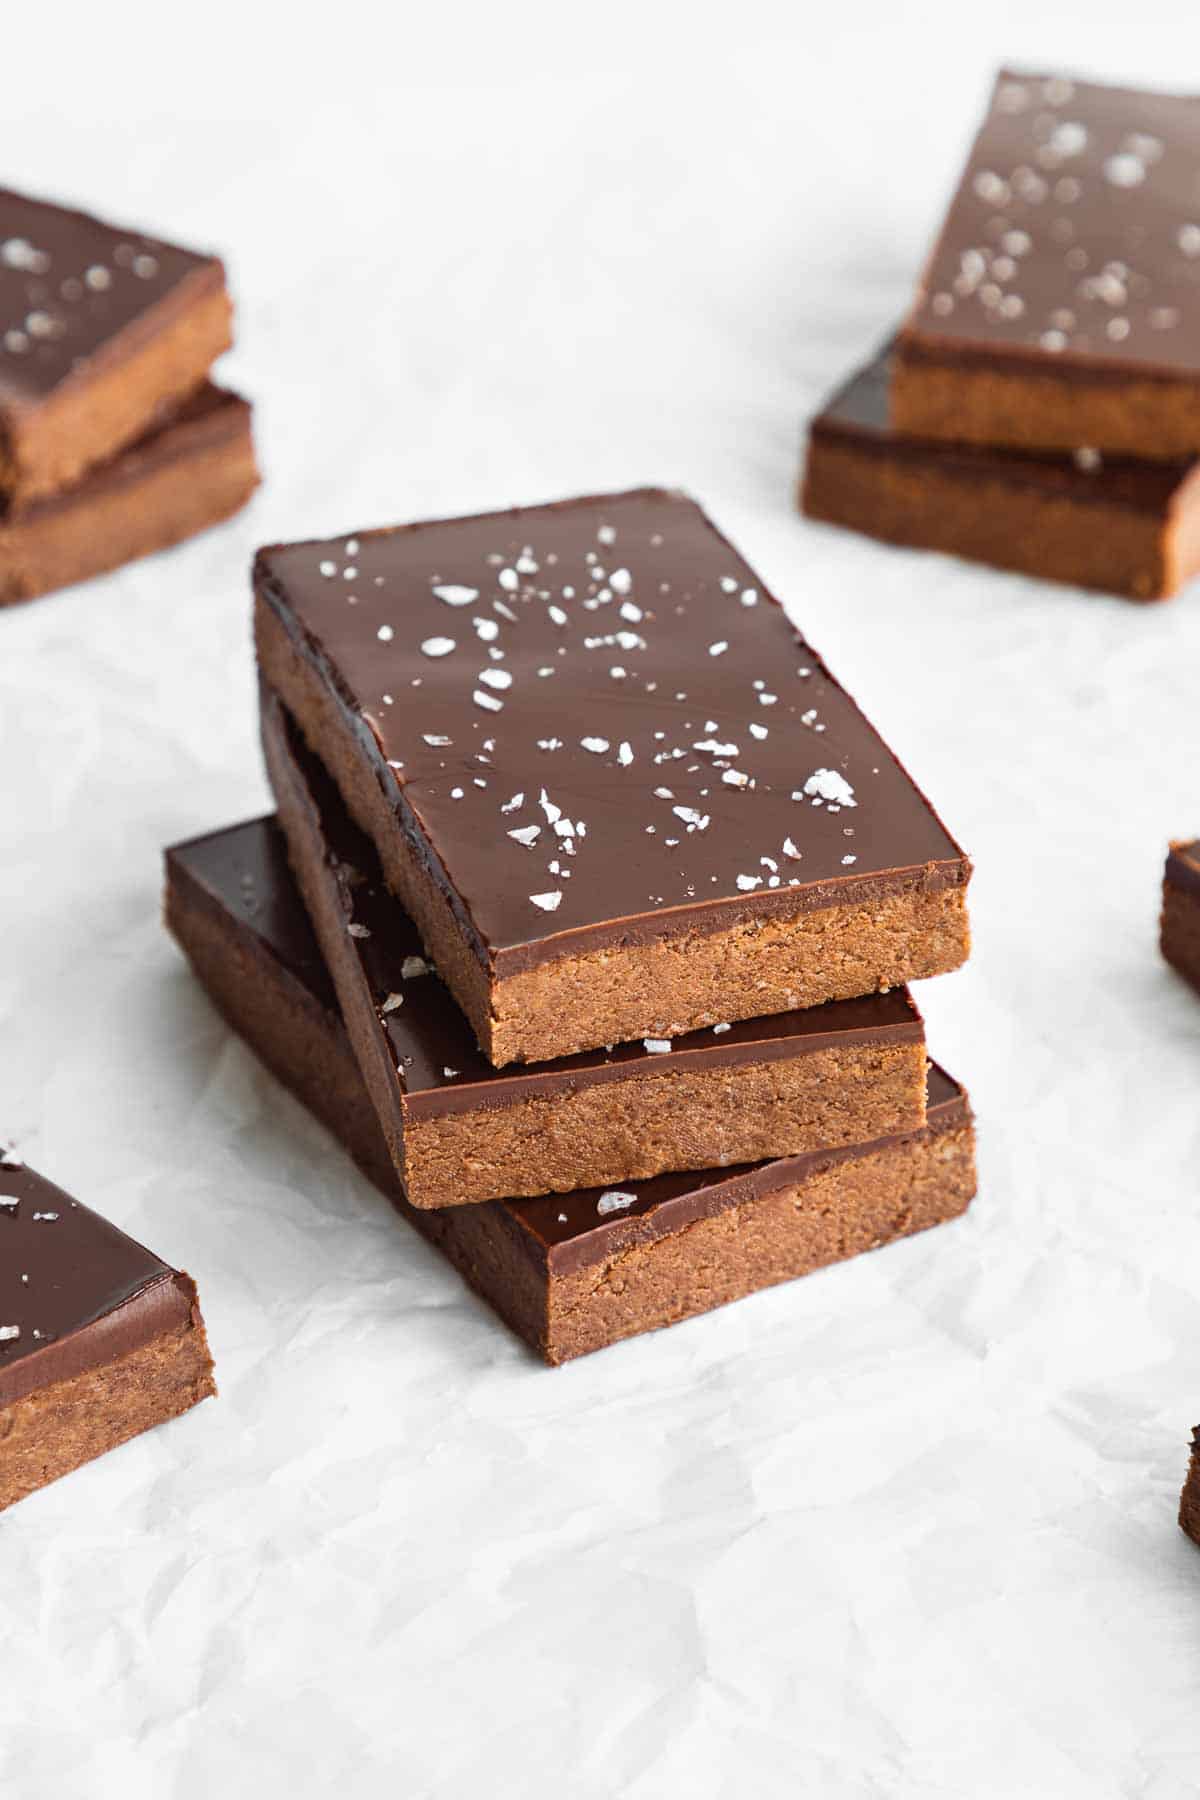 No Bake Chocolate Protein Bars - Purely Kaylie